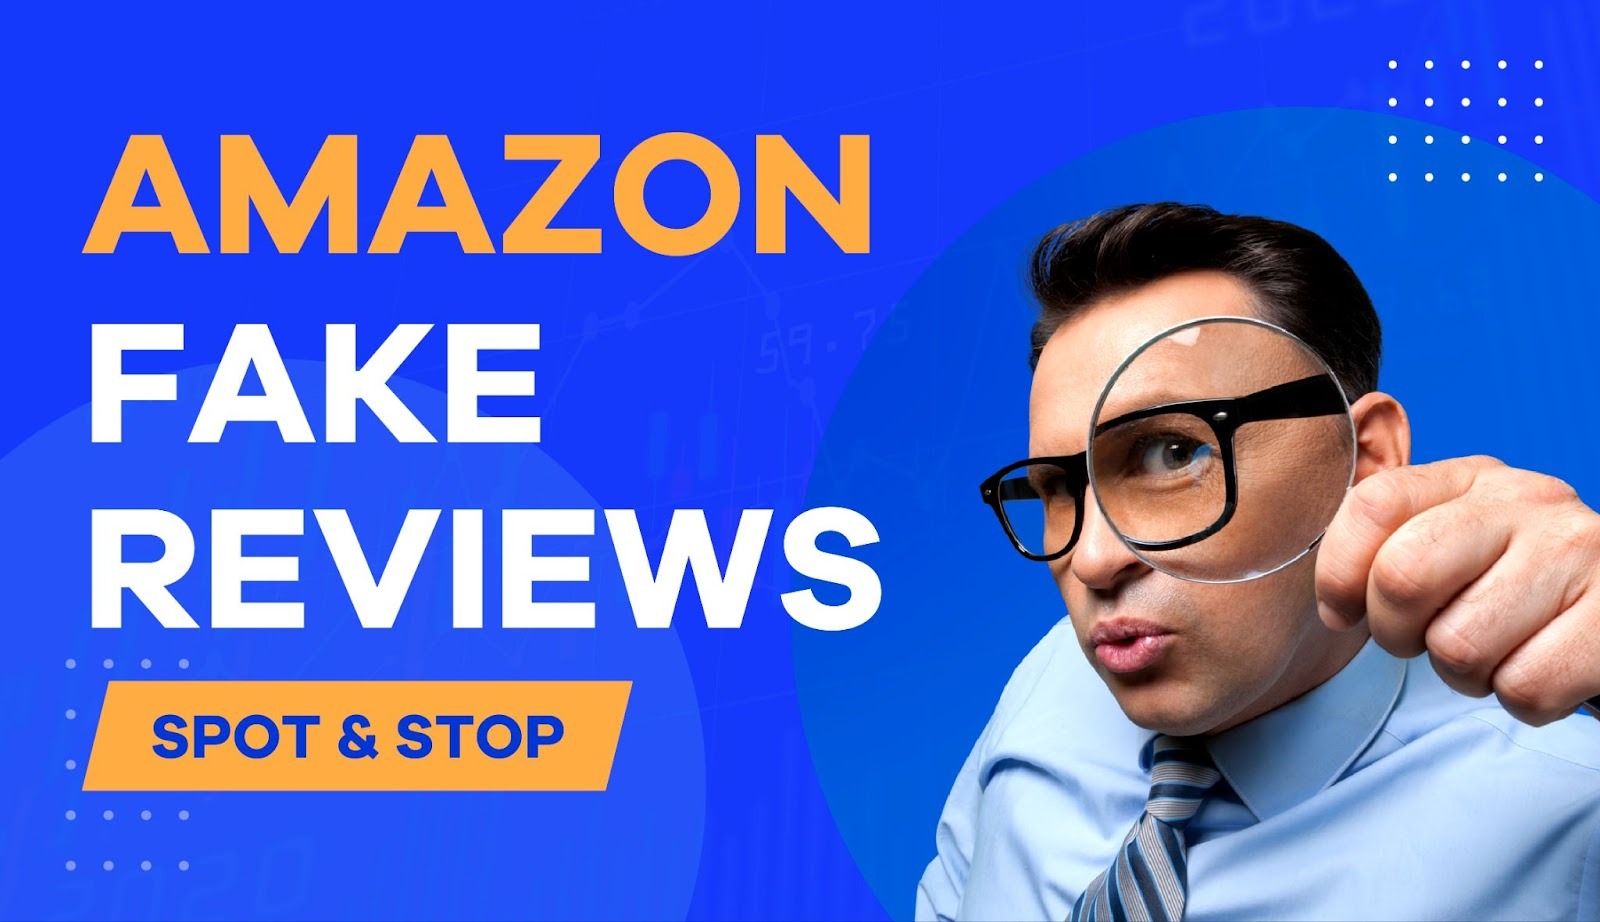 5 Simple Tips To Spot & Stop Amazon Fake Reviews